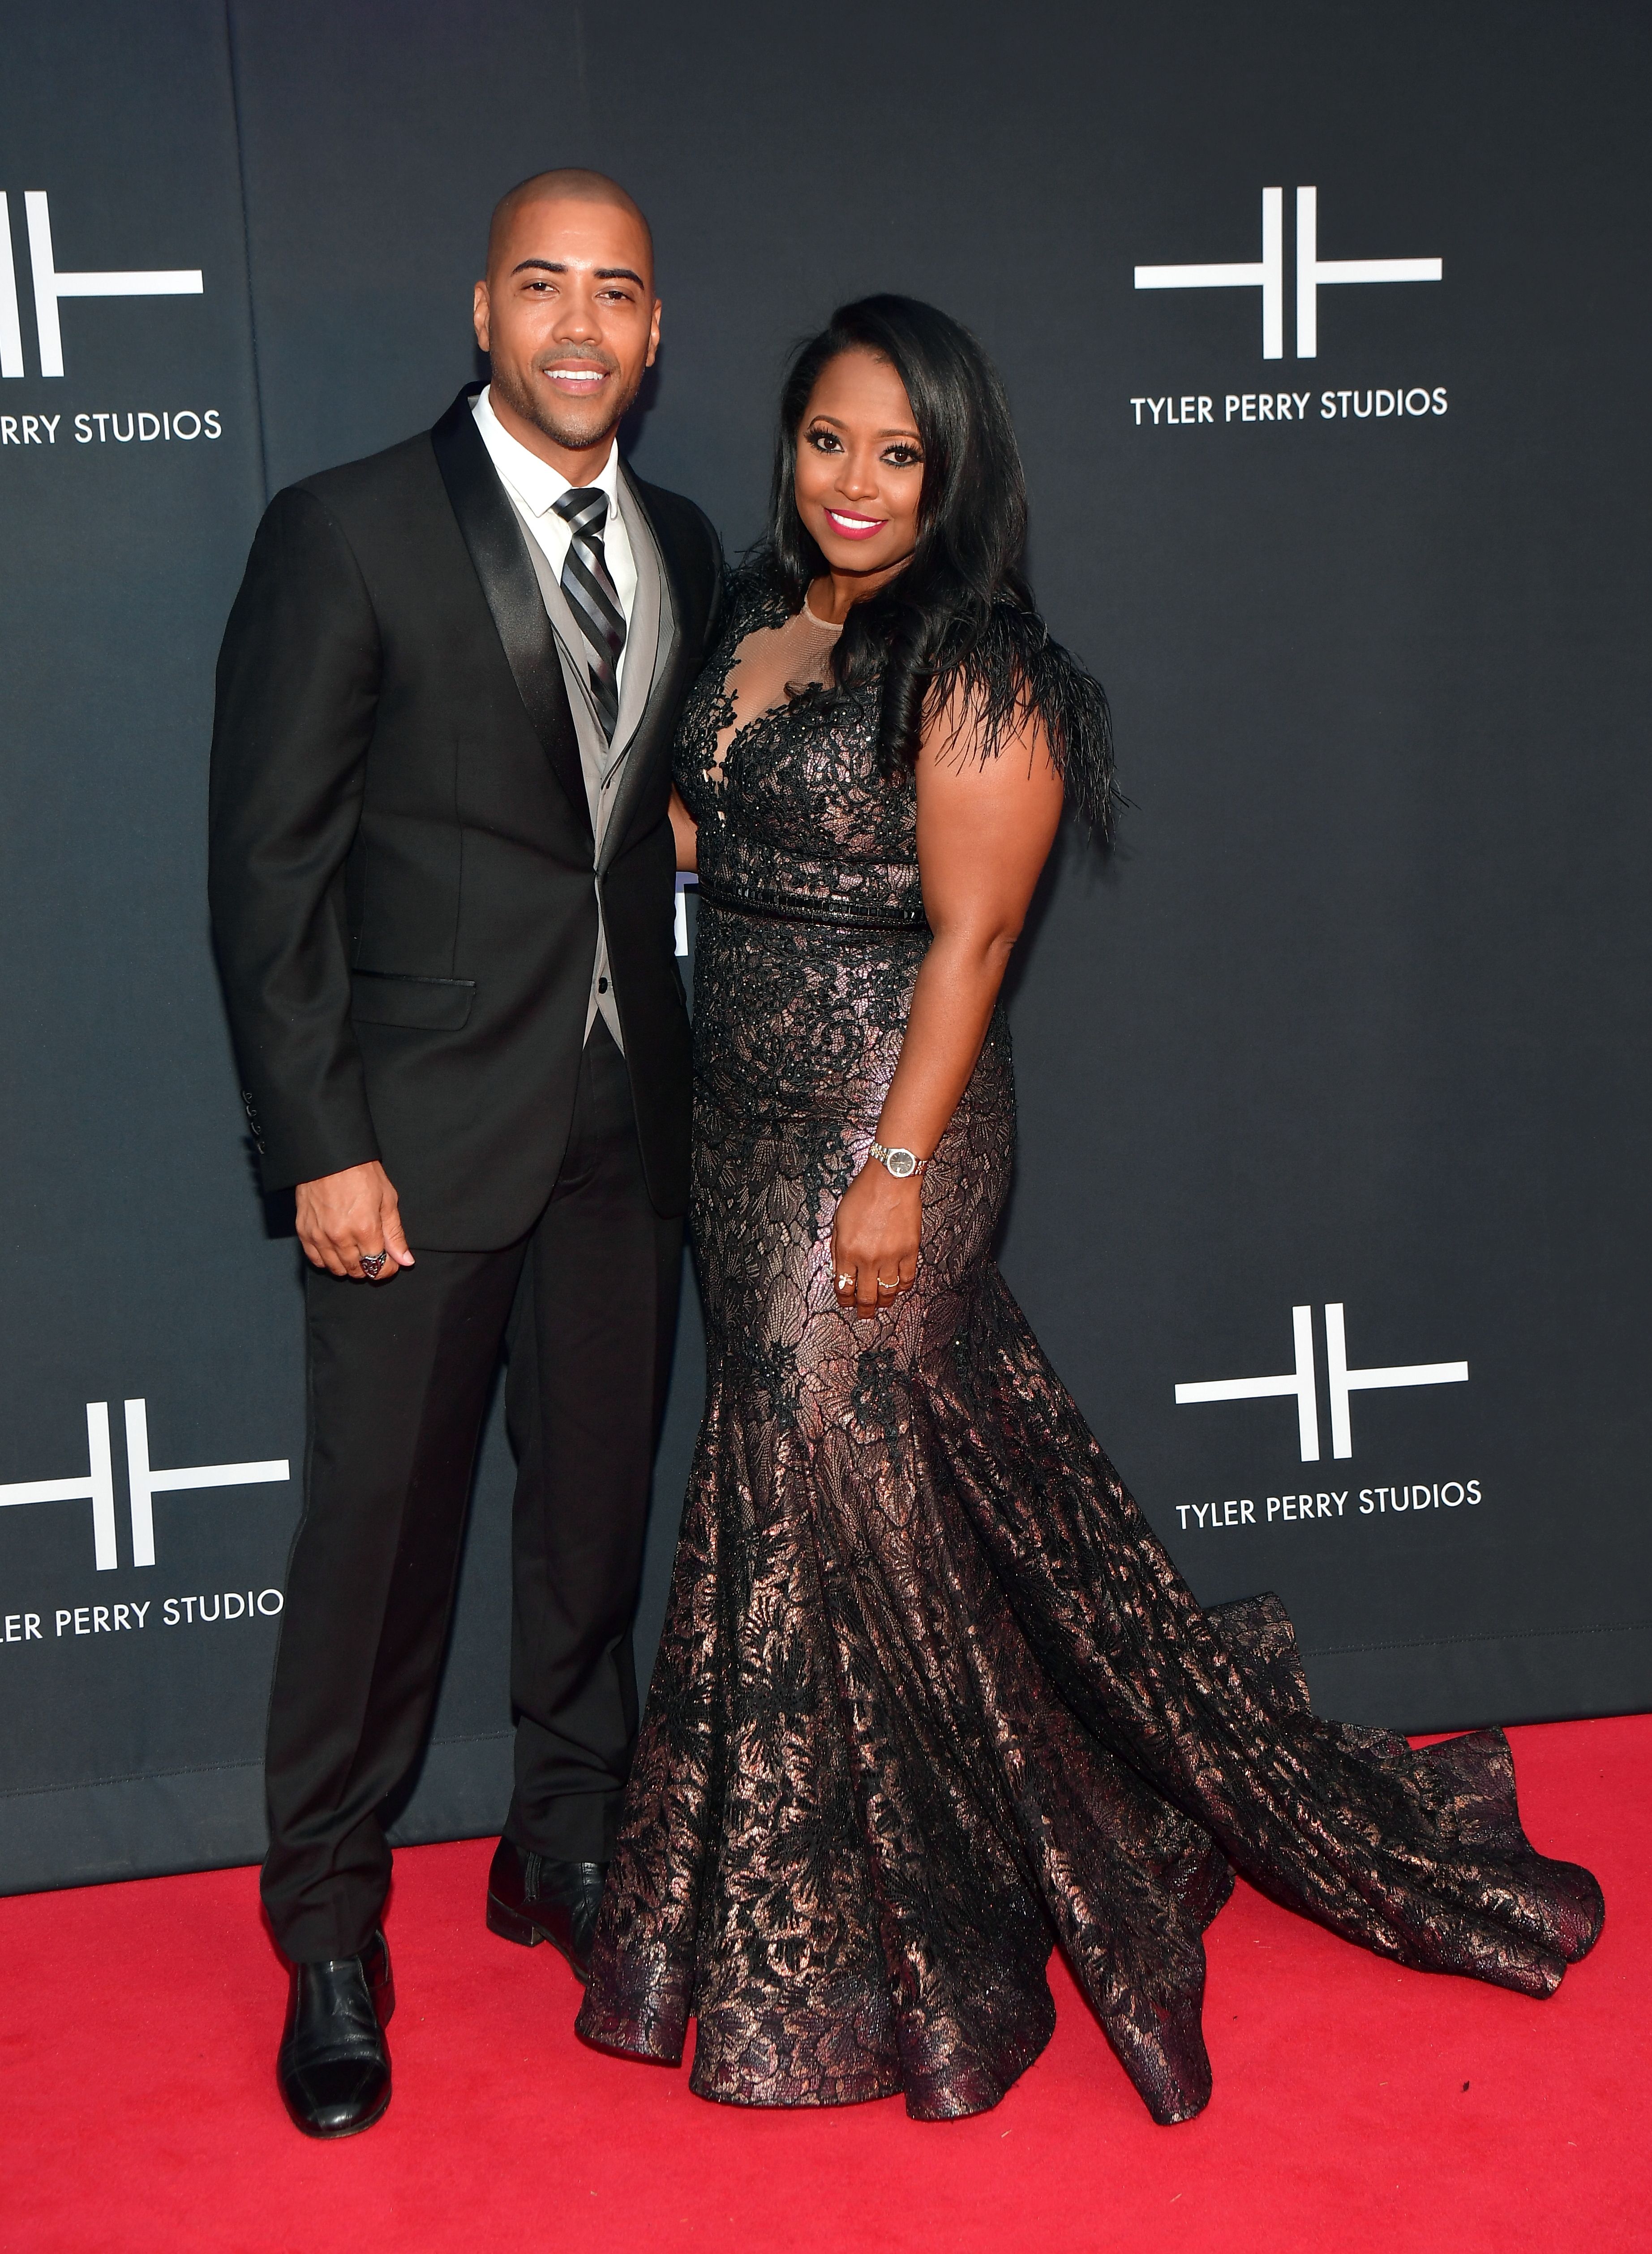 Brad James and Keshia Knight Pulliam during Tyler Perry Studios' Grand Opening Gala - Arrivals at Tyler Perry Studios on October 5, 2019 | Photo: Getty Images